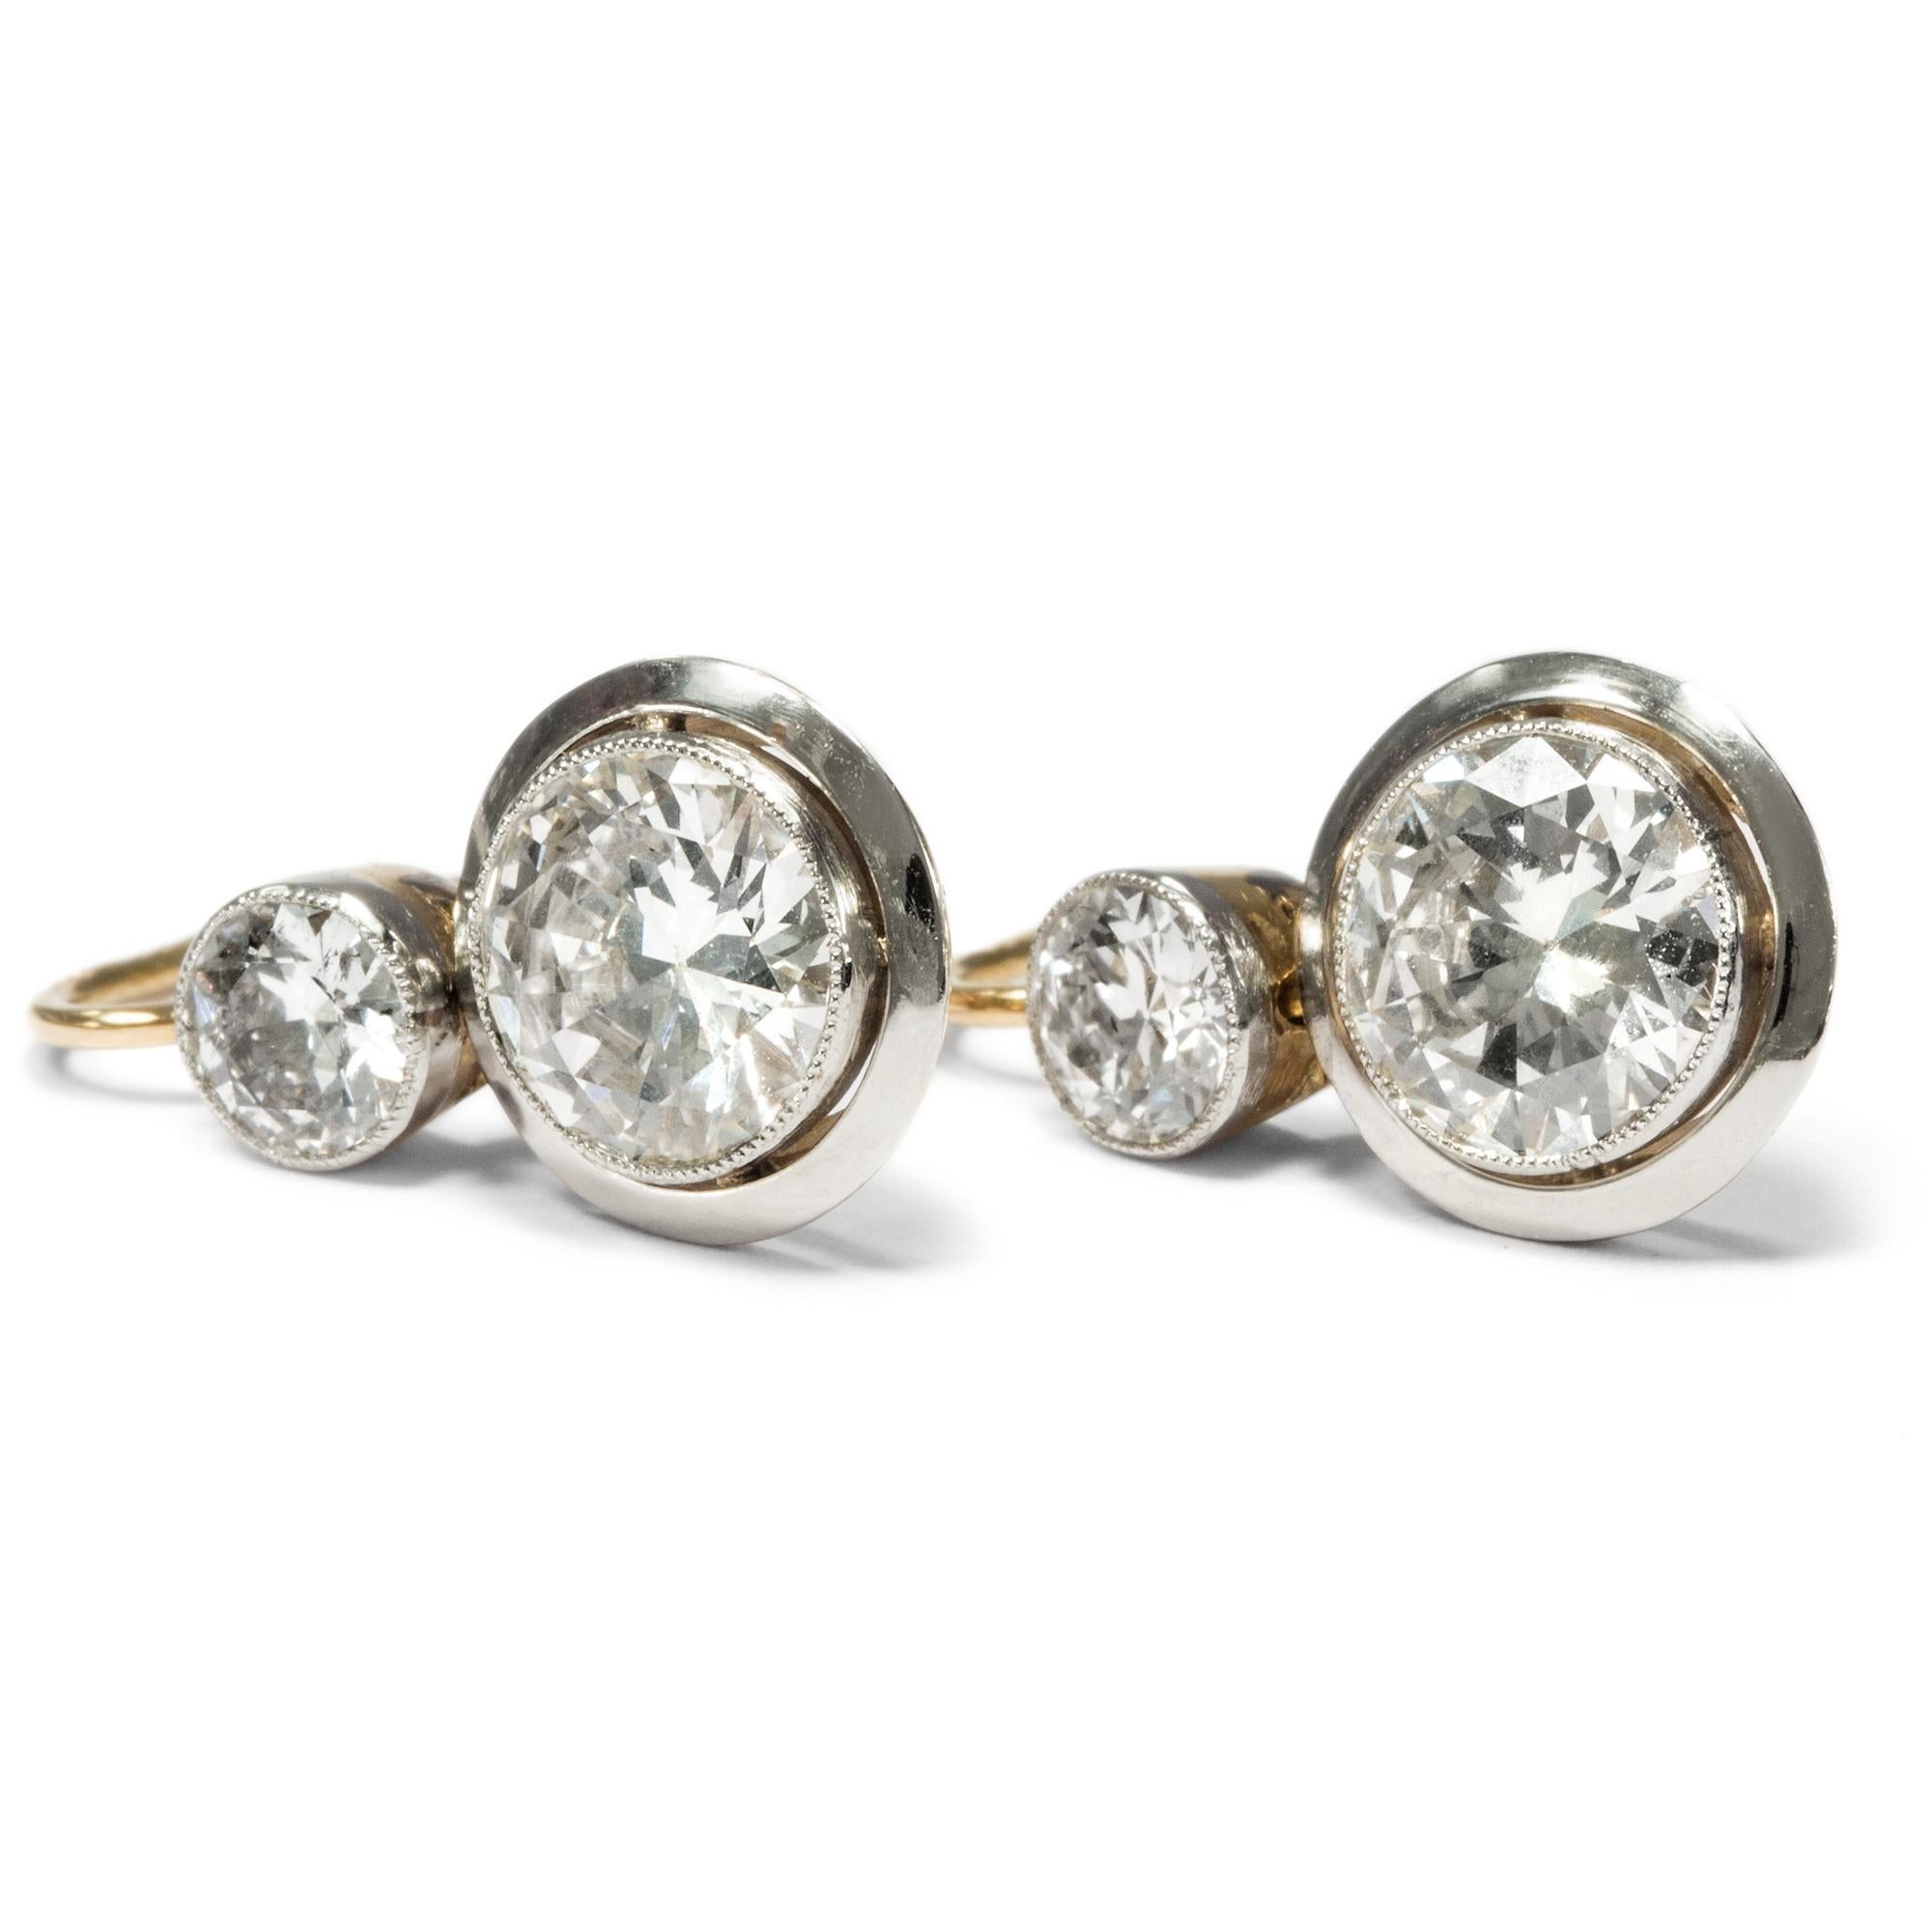 Four wonderful old European cut diamonds of overall 3,16 ct take centre stage in these precious earrings. The jewels take us an entire century back in time, to the years around 1920. Stylistically, they bridge the gap between the curvaceous Belle